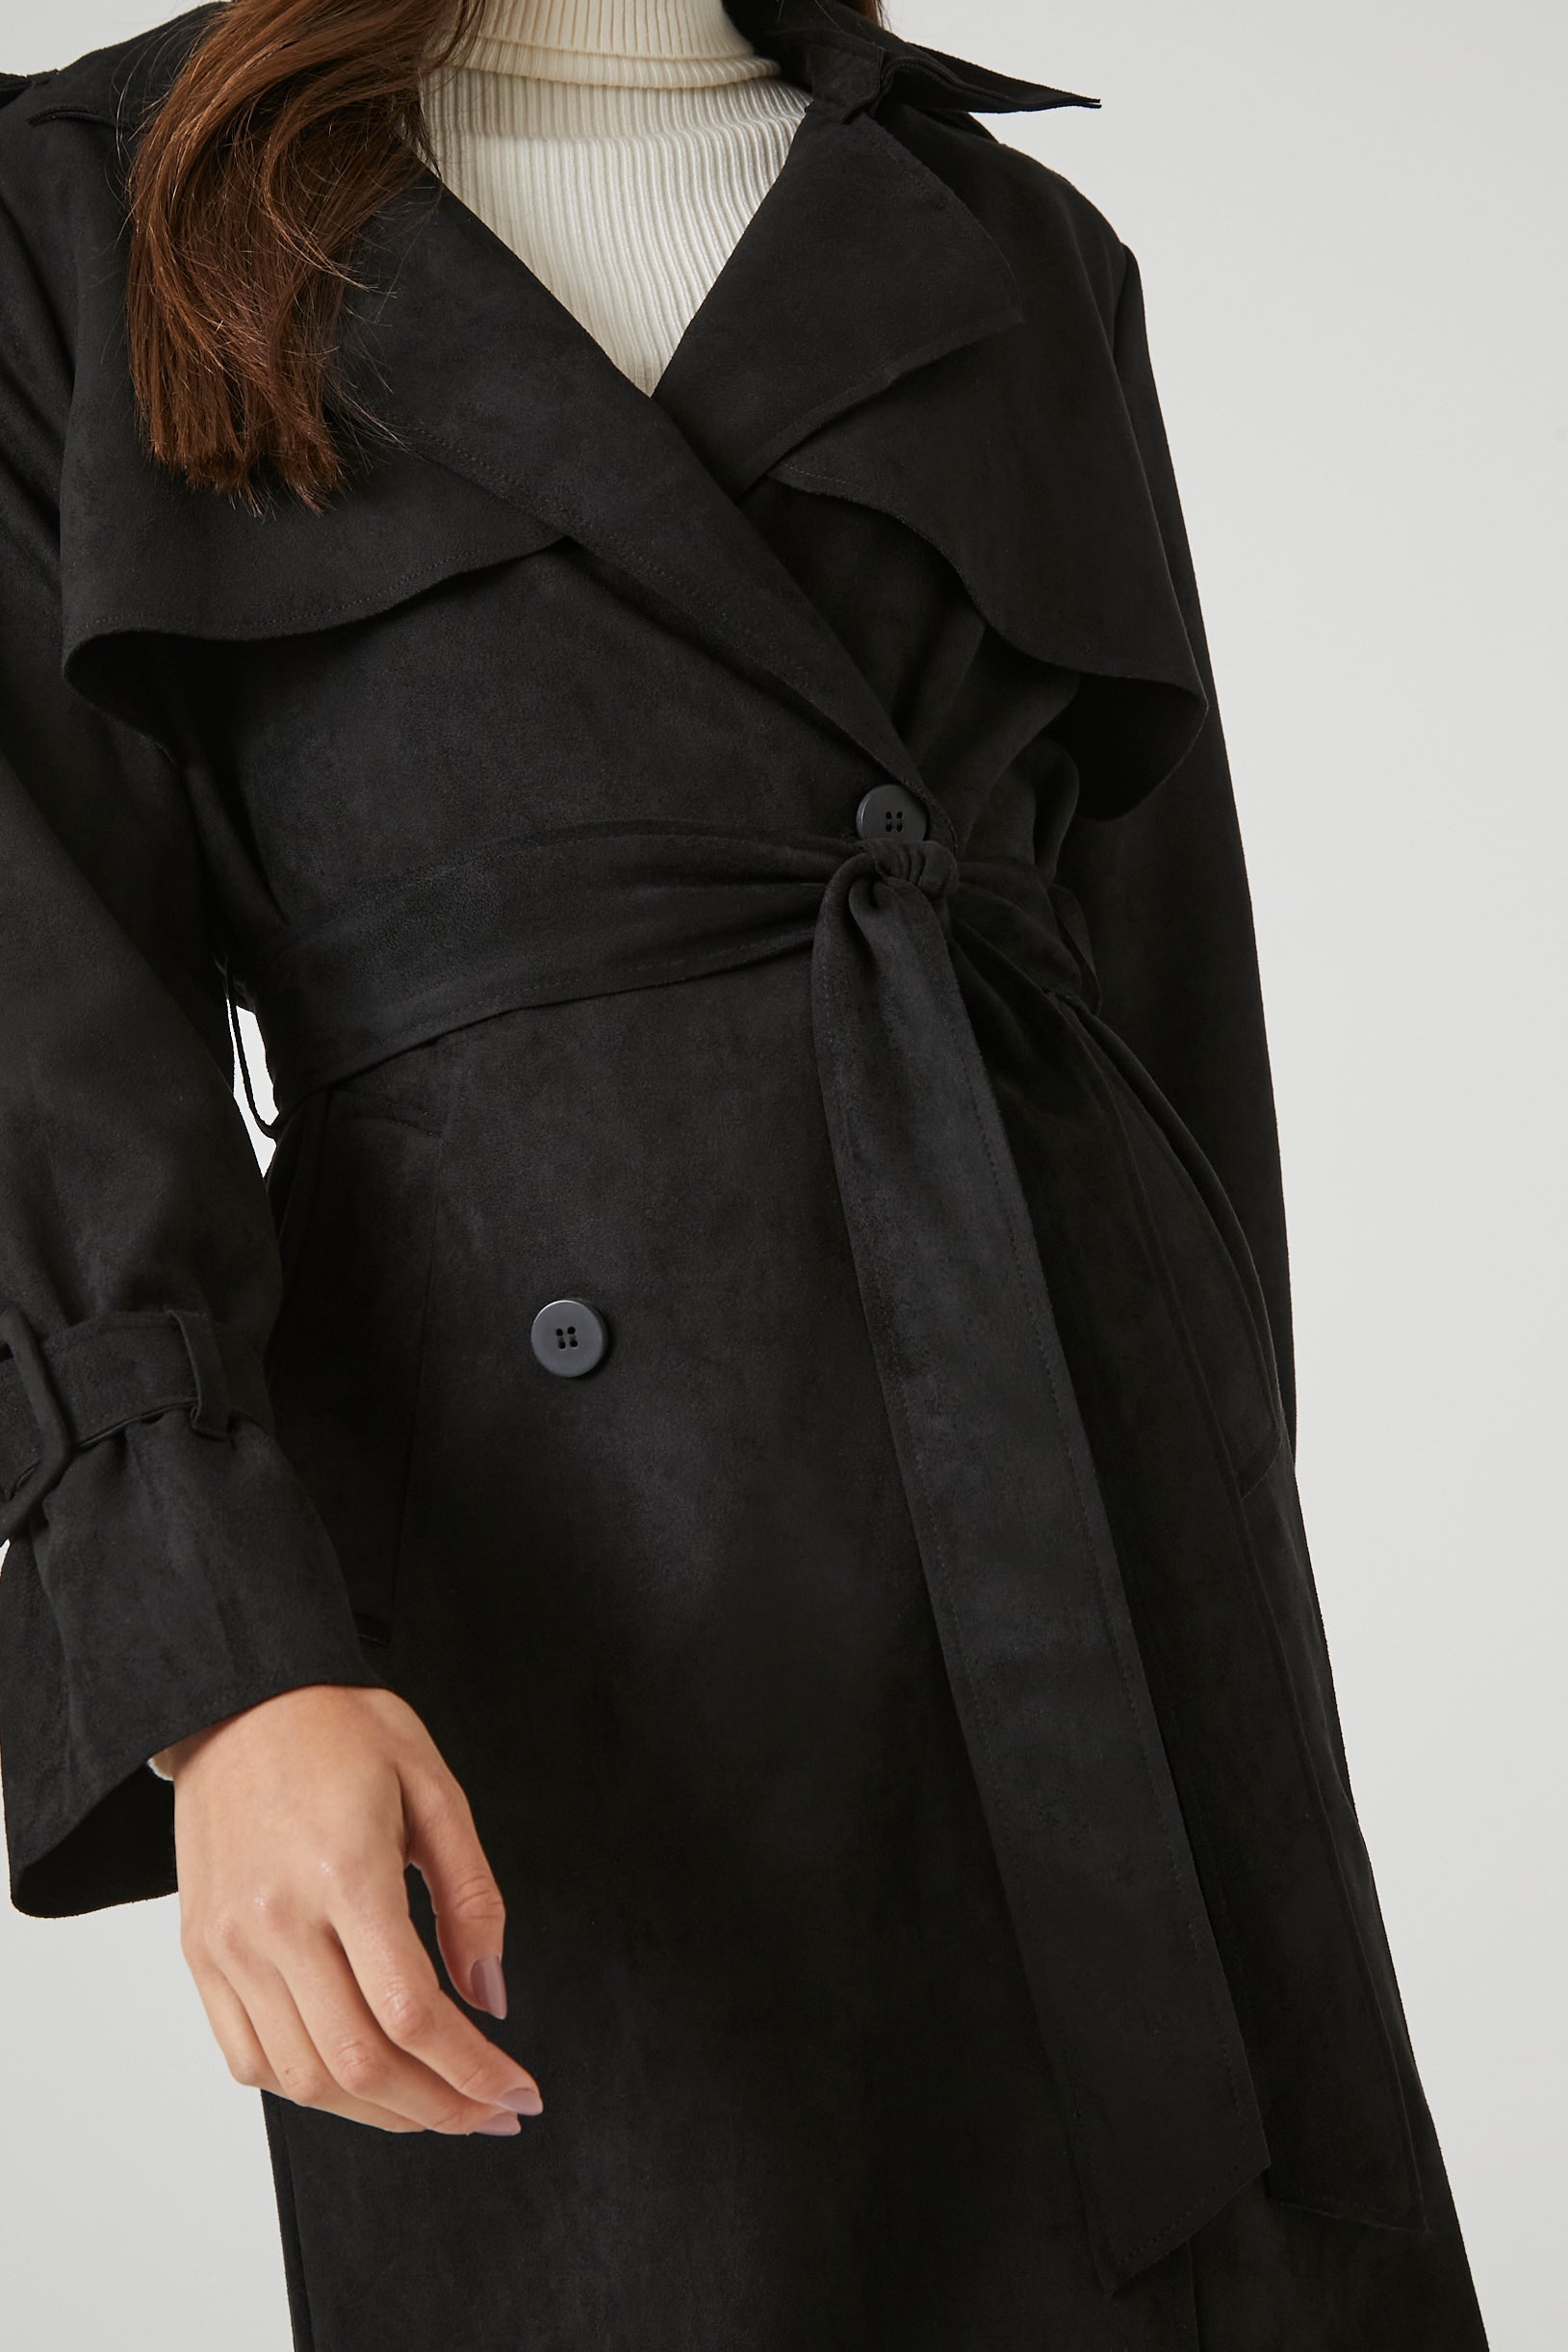 Black Faux Suede Trench Coat 4